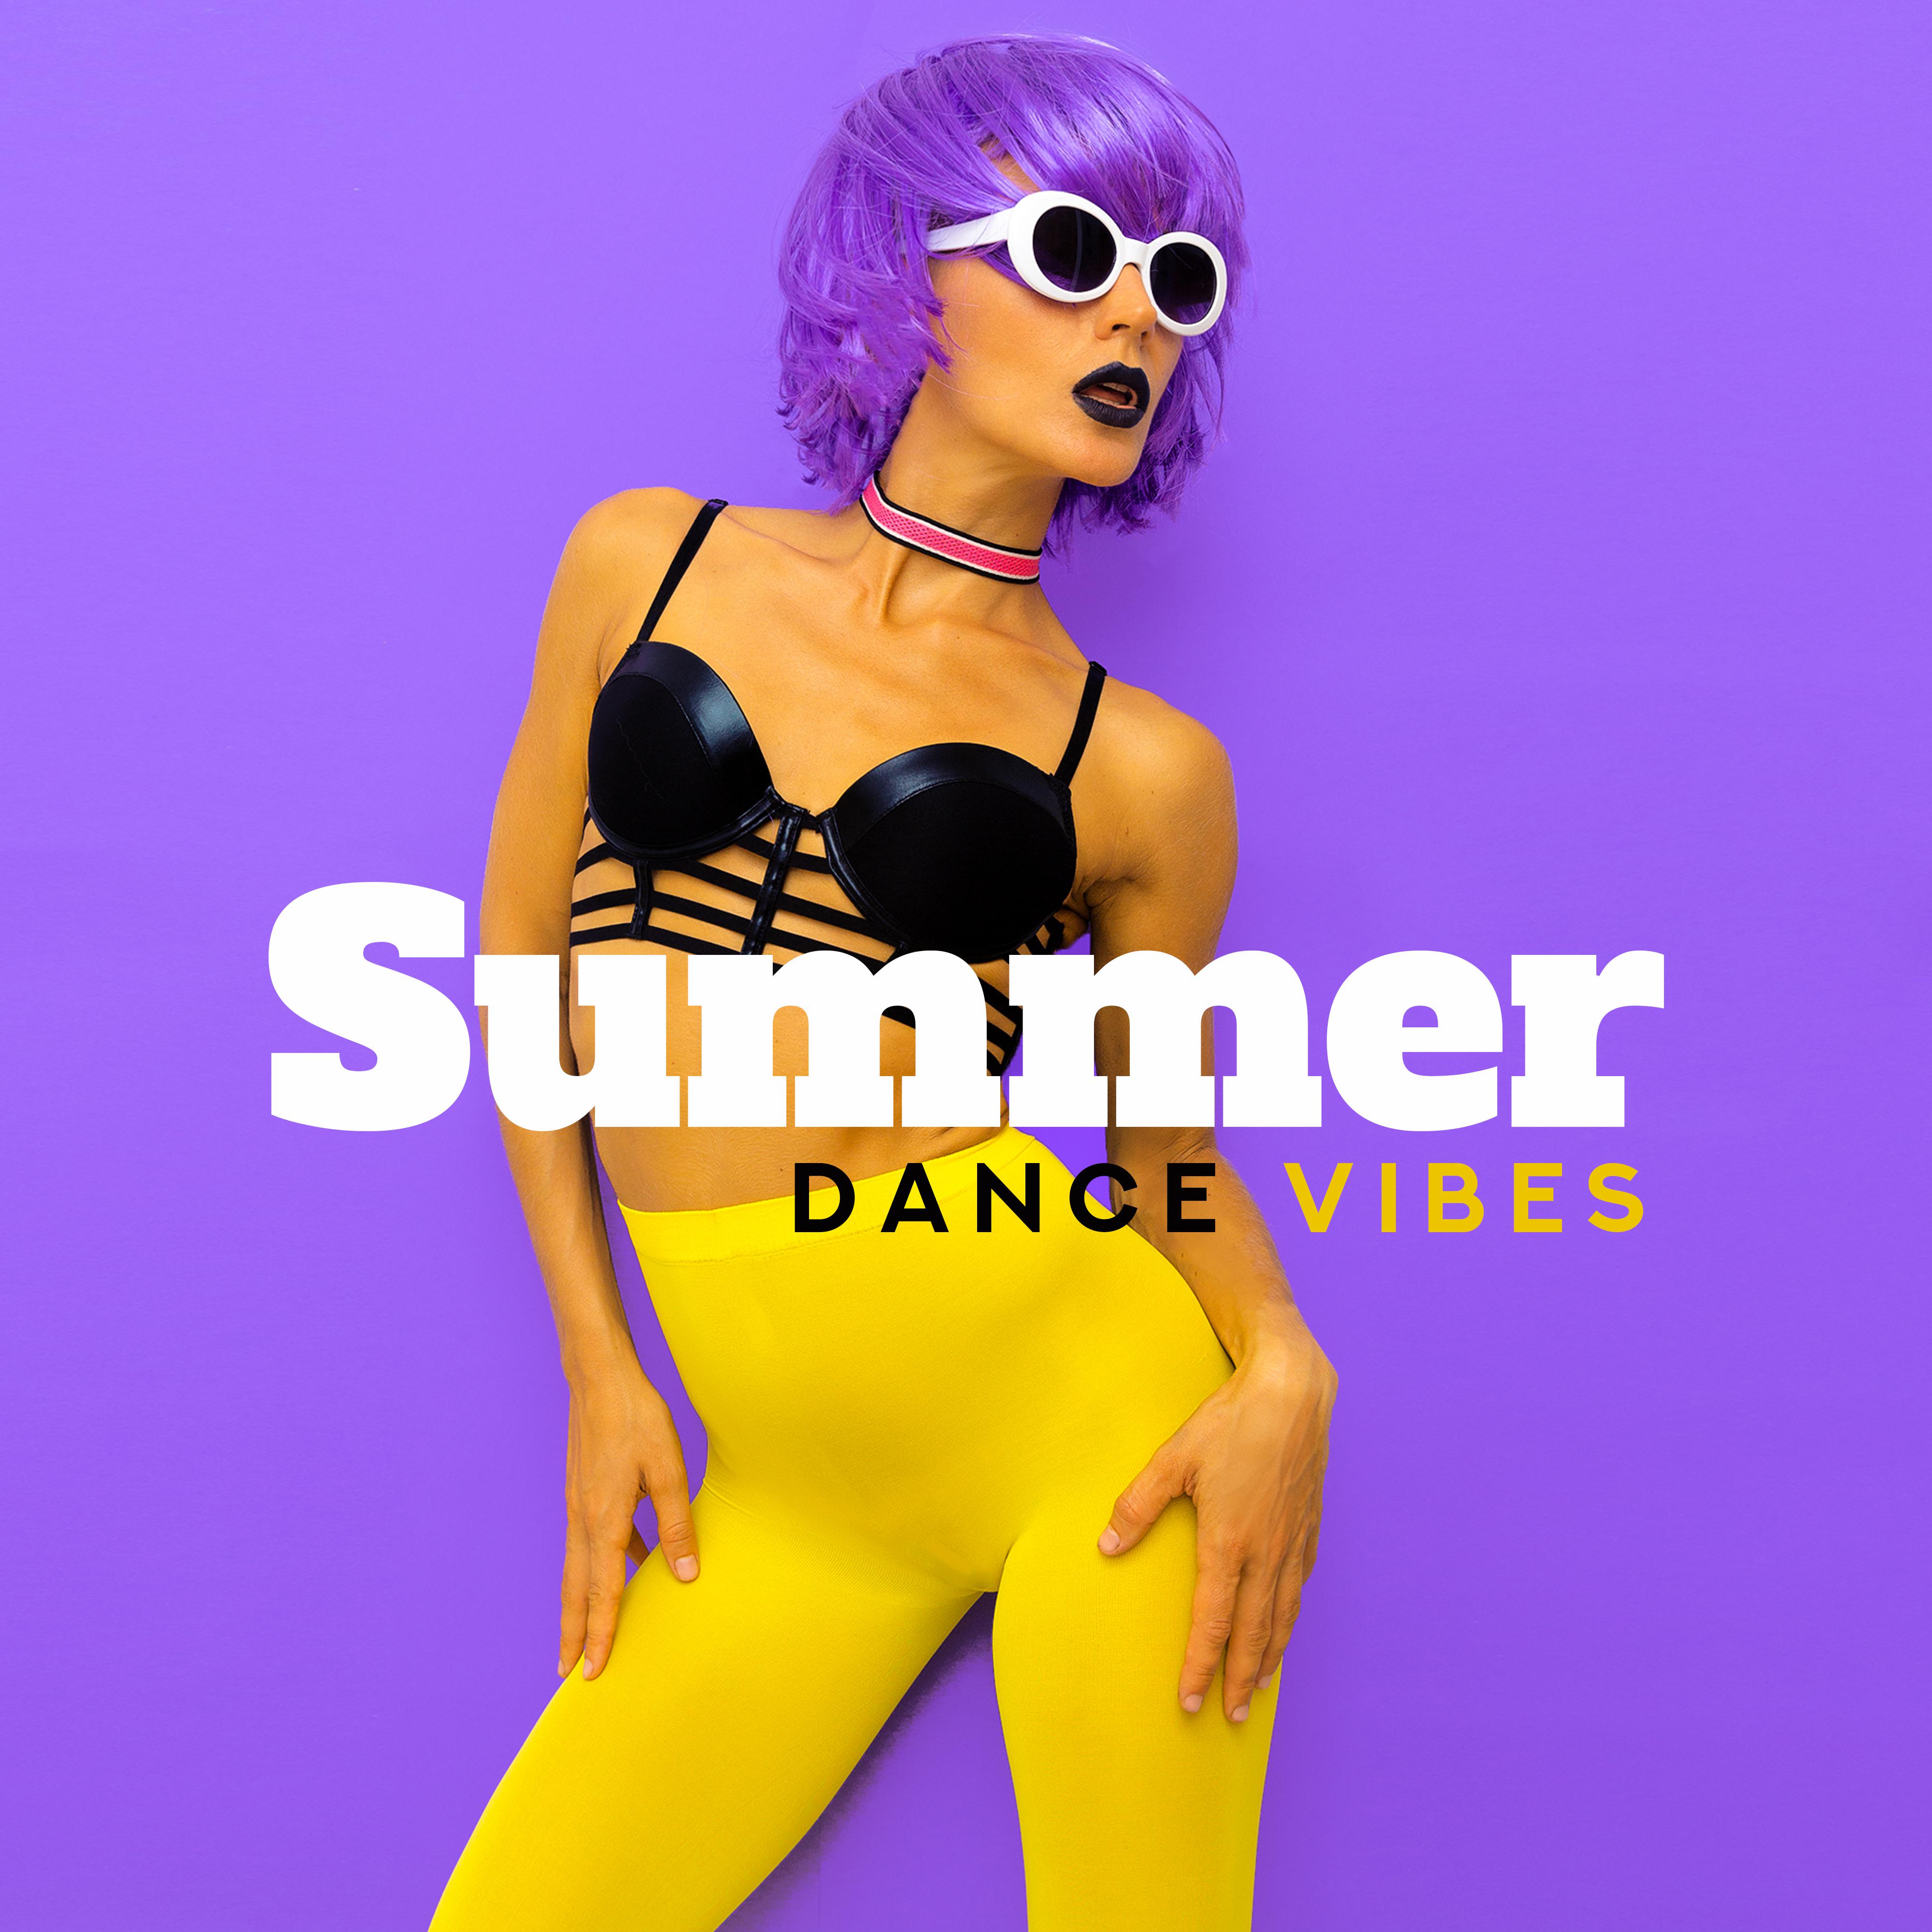 Summer Dance Vibes – Sunny Chill Out, Beach Party, Total Chill, Dance Music 2019, Ibiza Chill Out